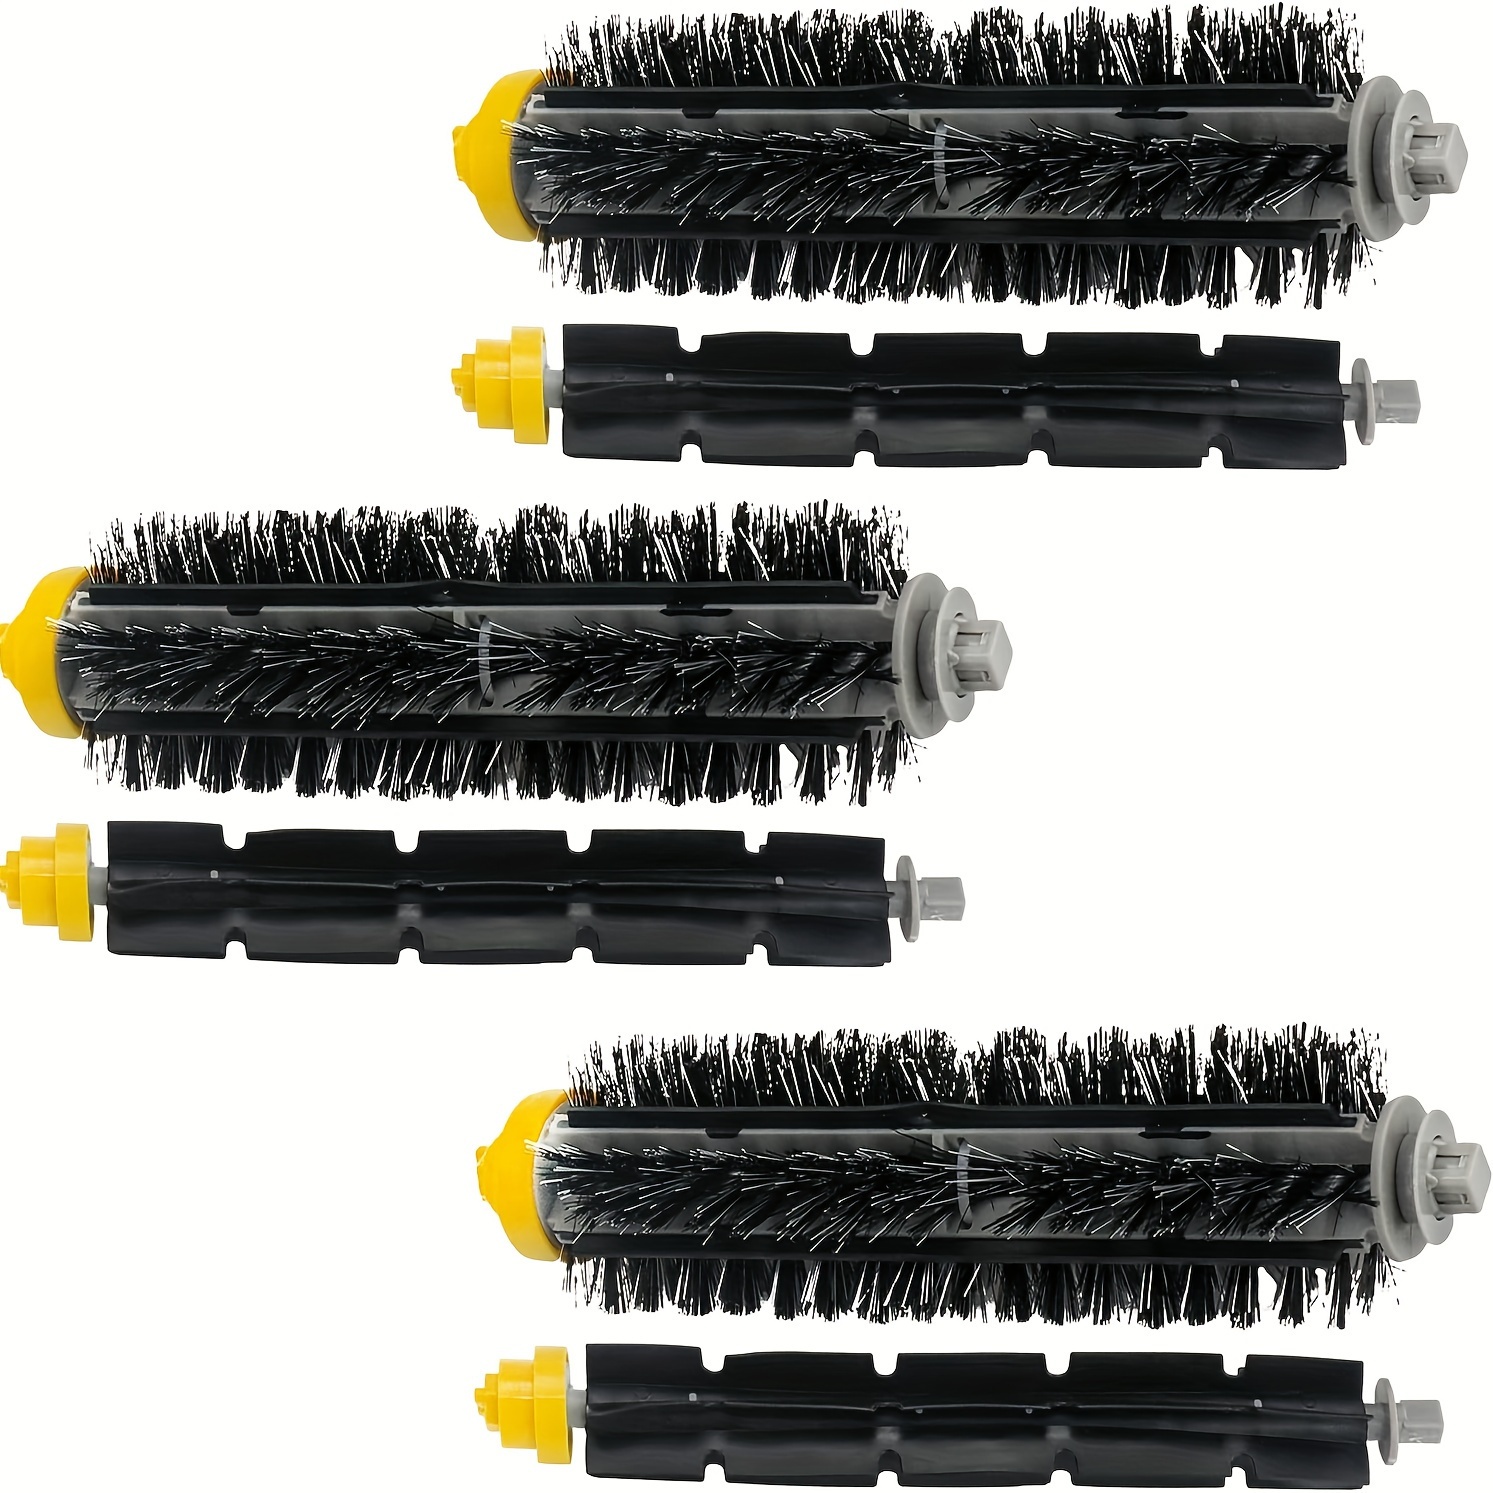 Replacement Spare Parts Accessories for iRobot Roomba i7 j7 i6 i8 i3 i4 i2  i1 i5 e5 e6 IEJ Series Vacuum Cleaner,1 Roller Brush,4 Pack Filter,and 4